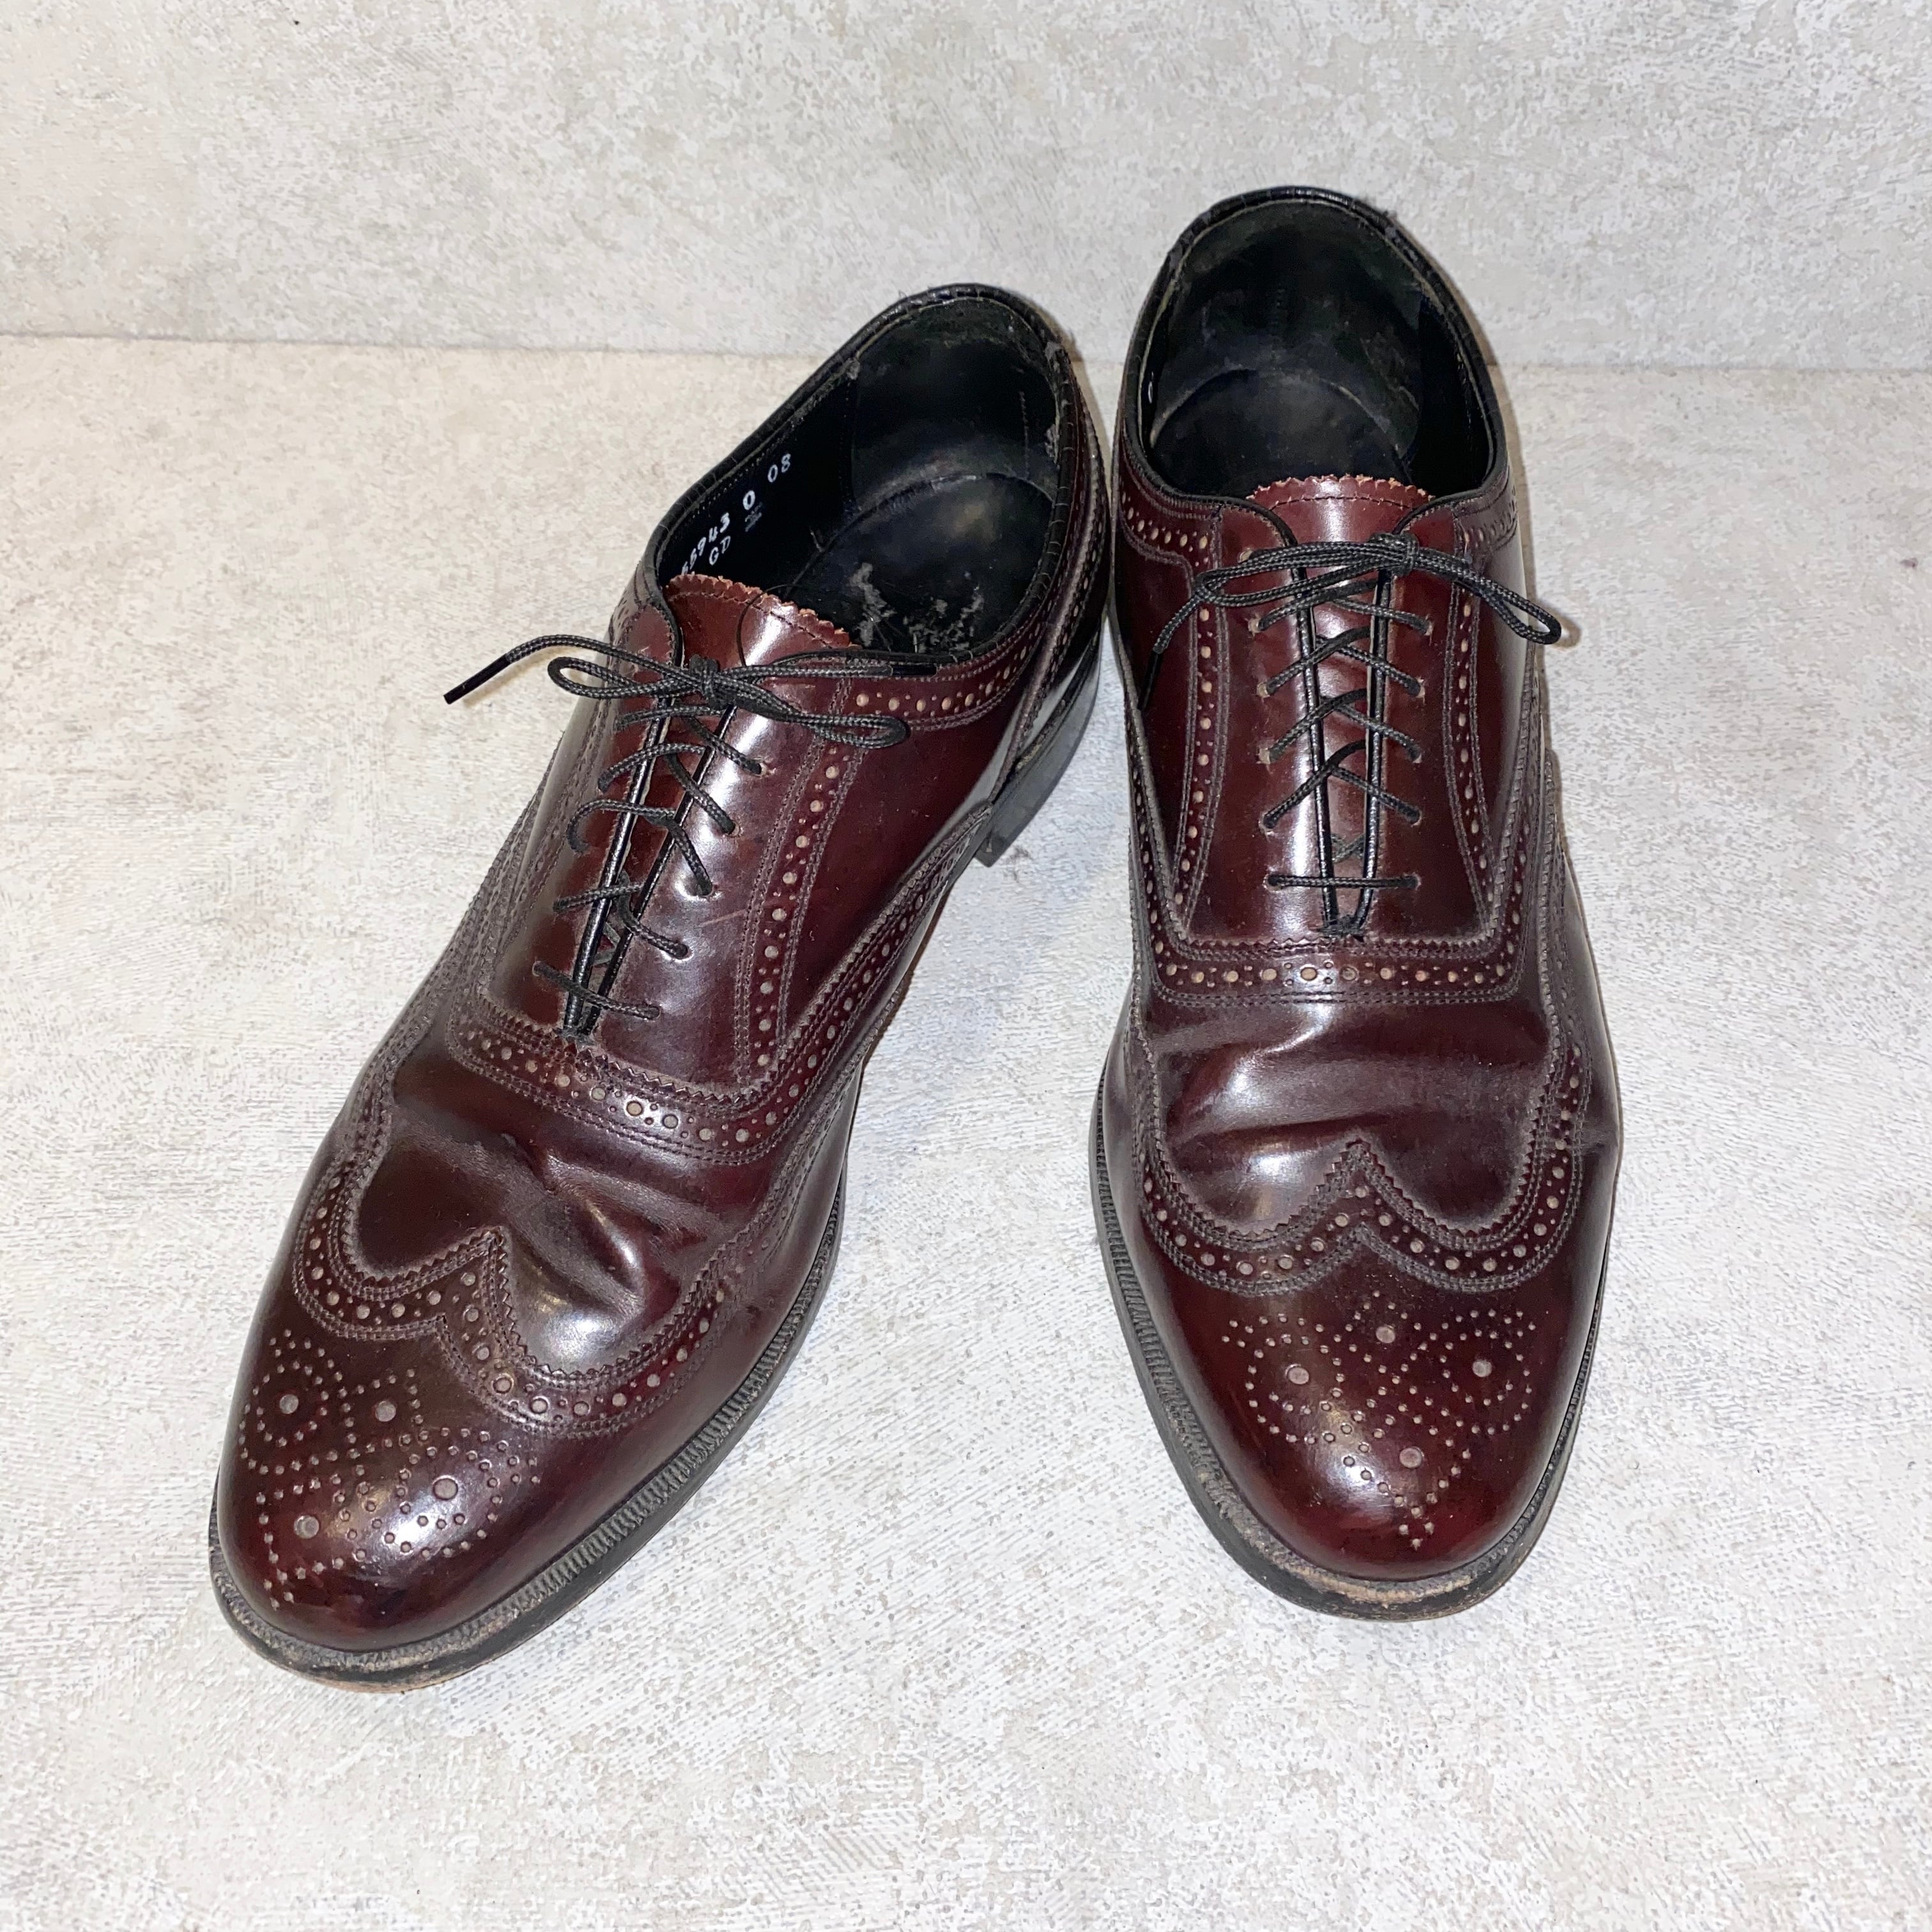 FLORSHEIM burgundy color full-brogue leather shoes | NOIR ONLINE powered by  BASE